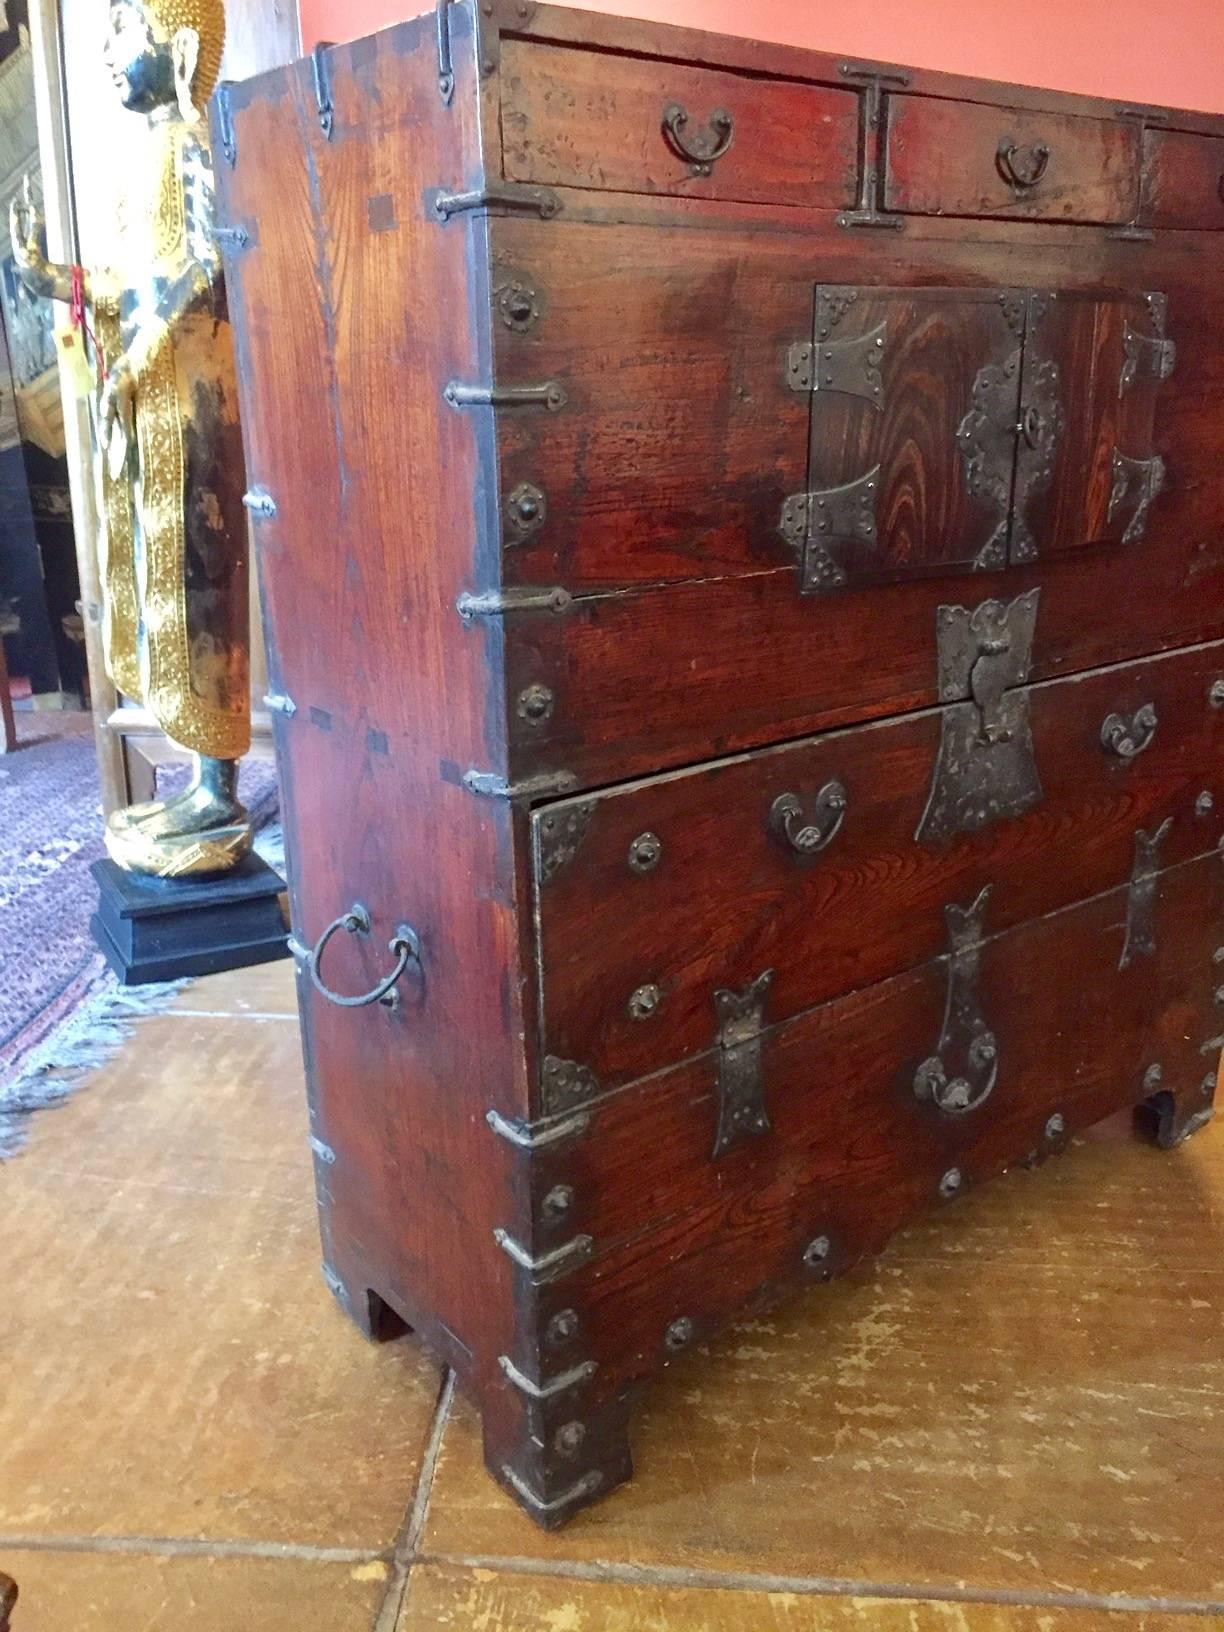 Crafted of solid woods, this chest features wonderful handmade hardware and rivets.
There are three small drawers as well as two larger compartments.